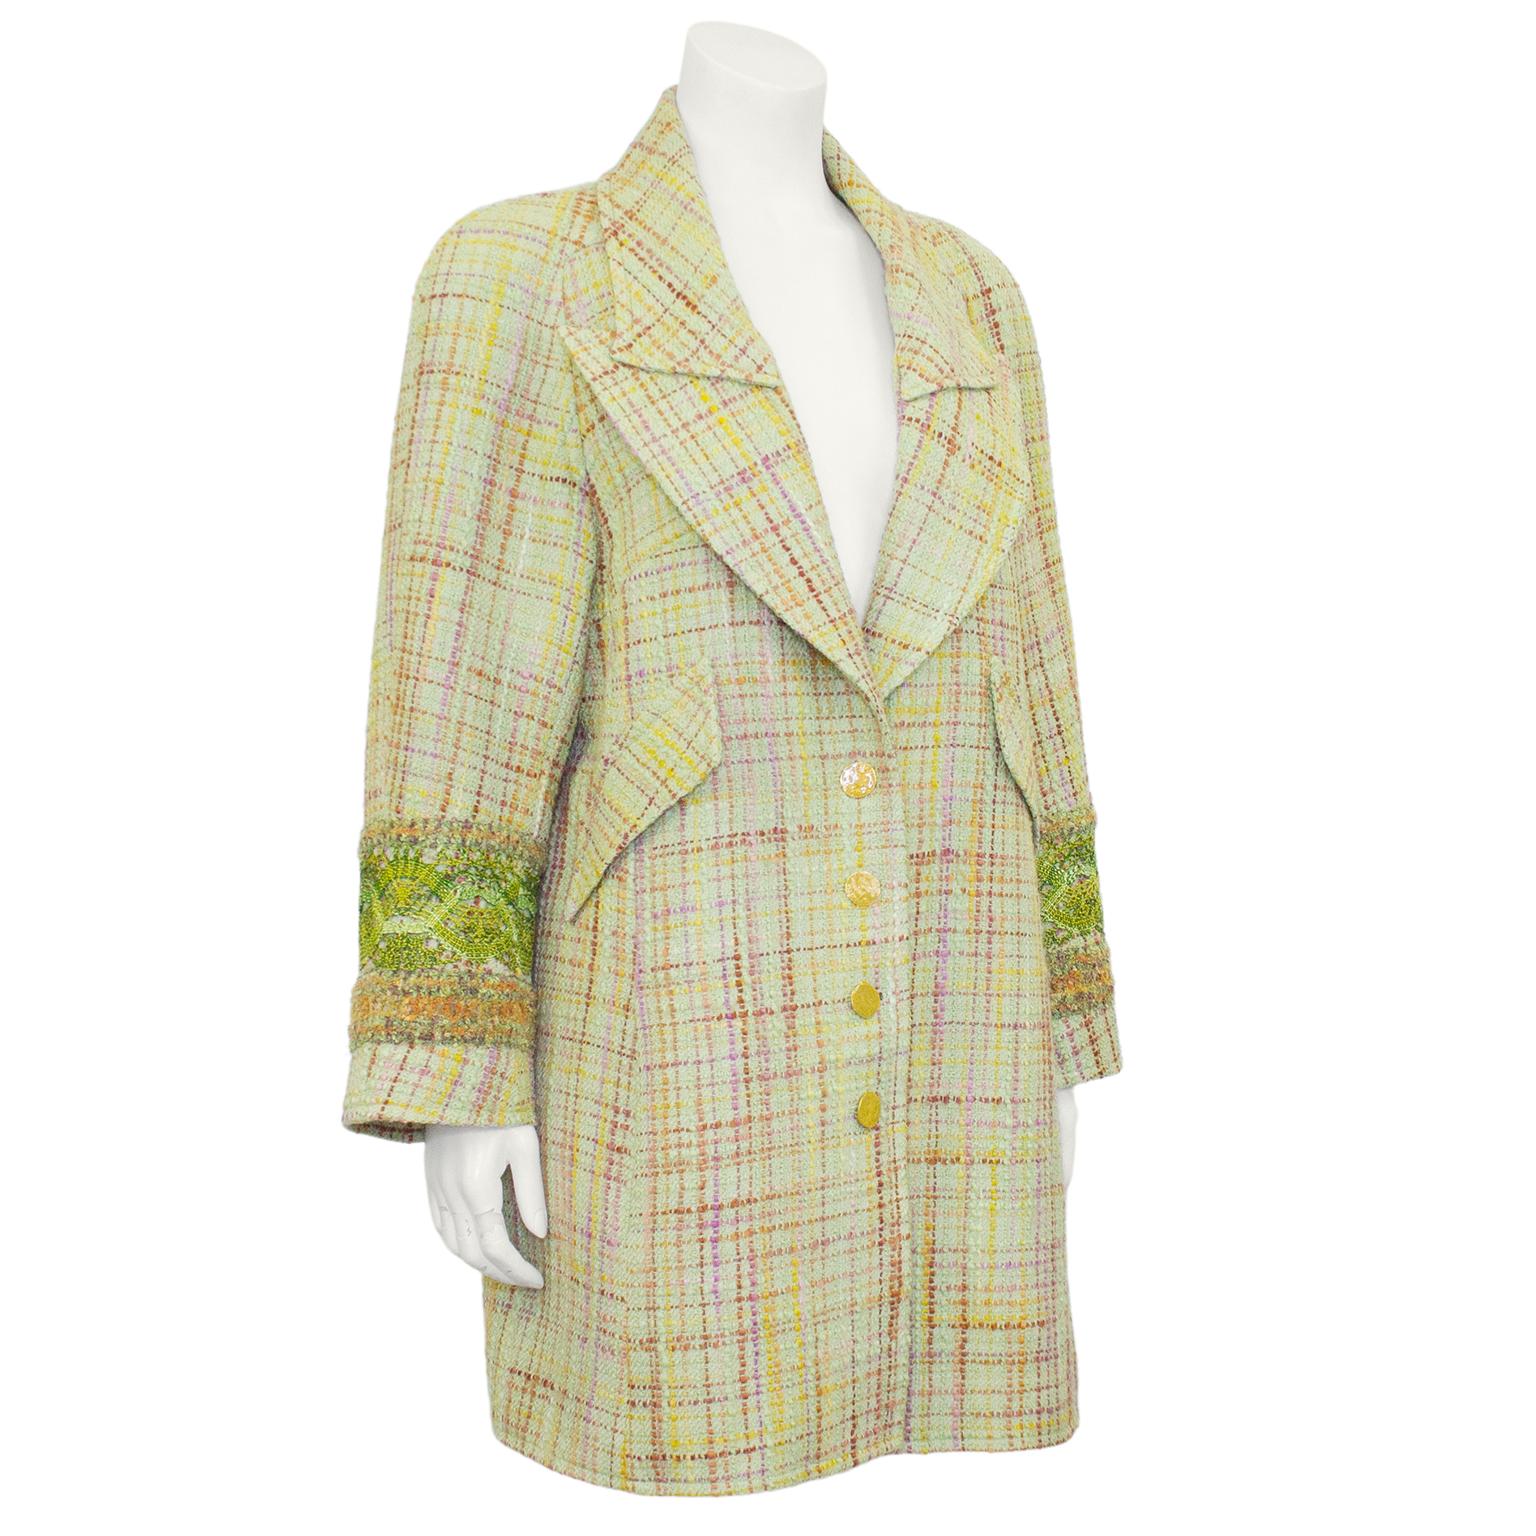 Christian Lacroix ensemble from the 1990s. Long equestrian style pastel green tweed with shades of pink, purple and yellow throughout. Oversized notched collar, crochet detail at cuffs, faux diagonal flap pockets and functional hidden vertical slit